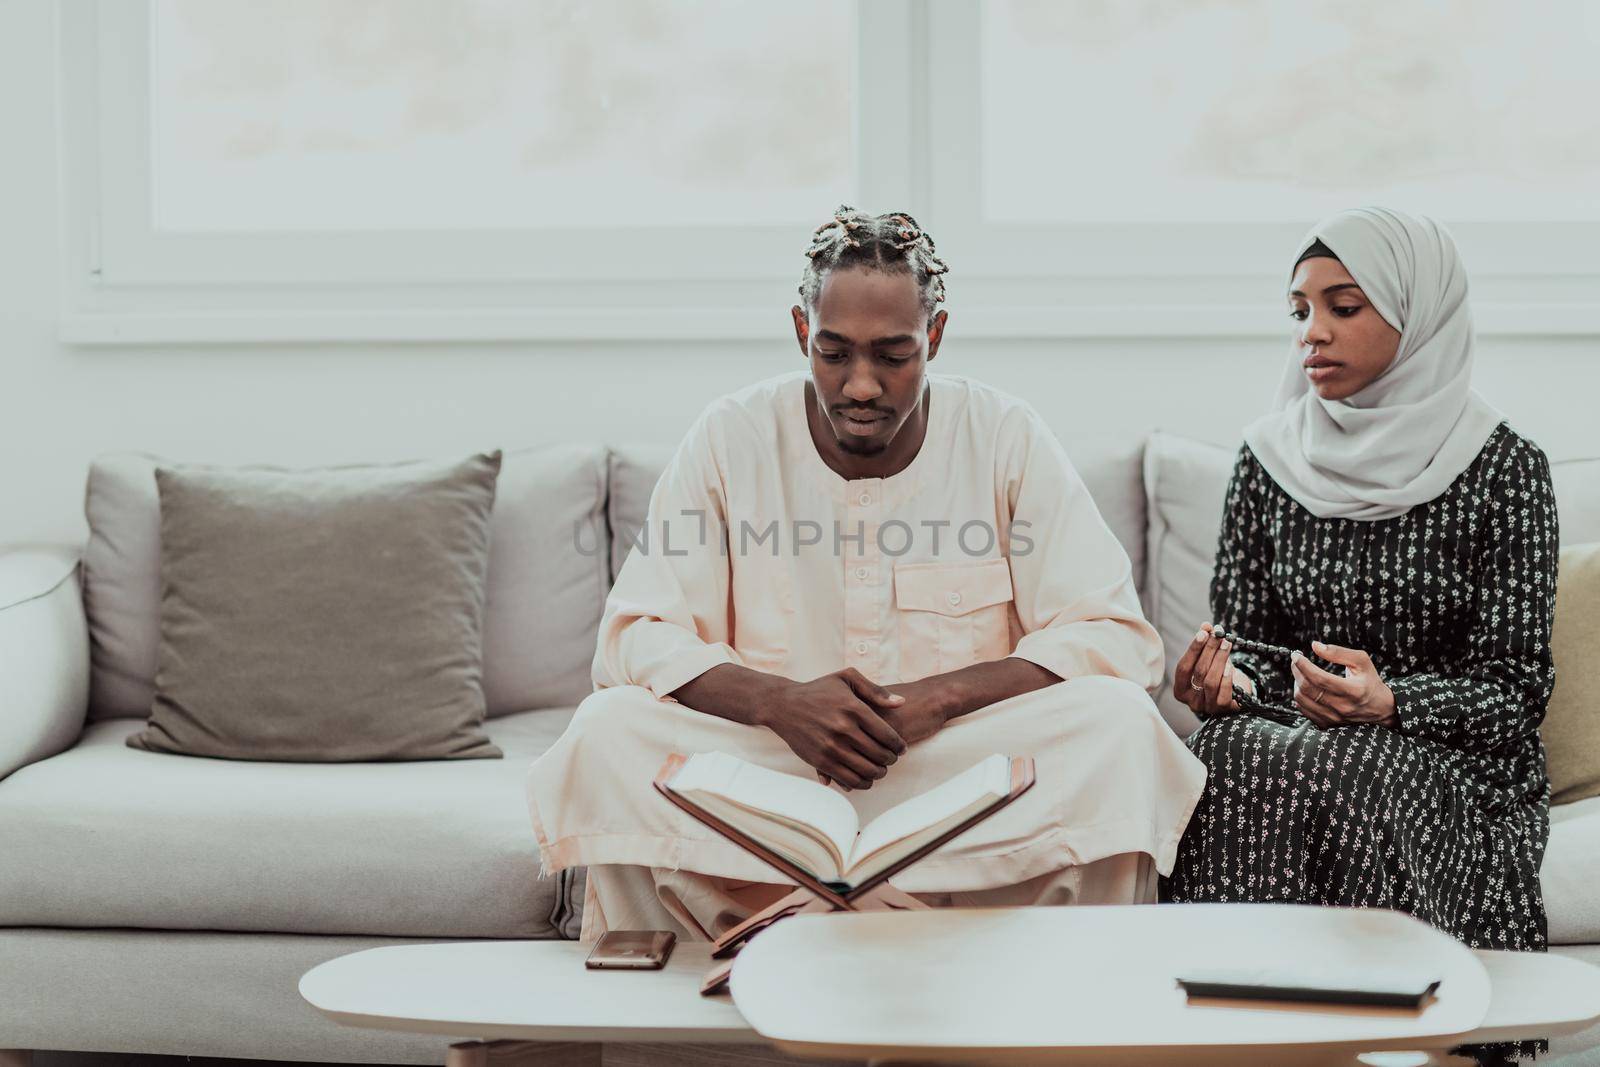 African Muslim couple at home in Ramadan reading Quran holly Islam book. High-quality photo